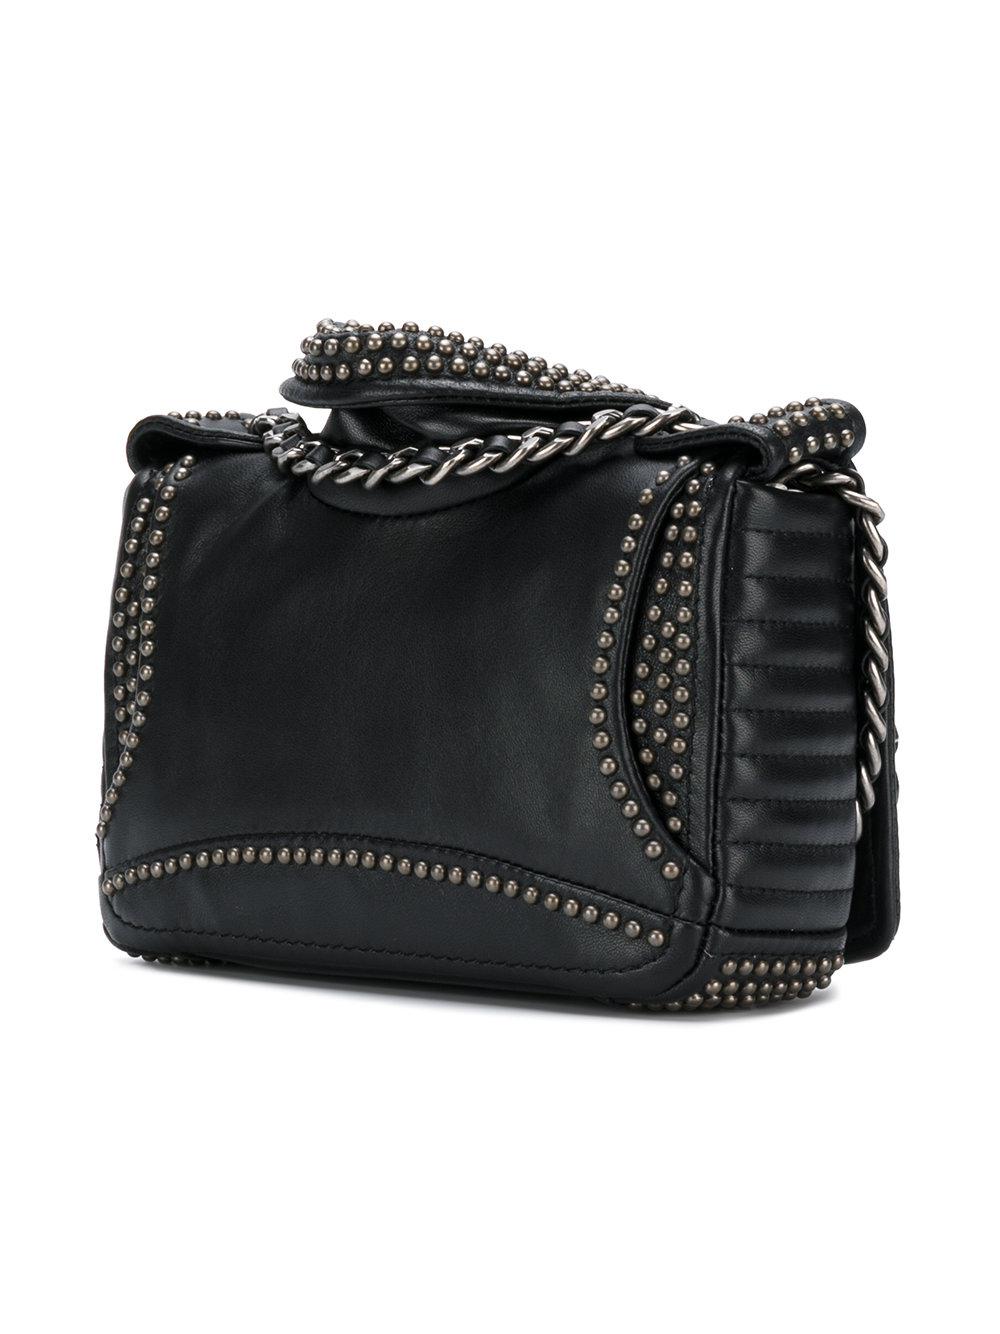 Moschino Studded Leather Jacket Bag in Black - Lyst